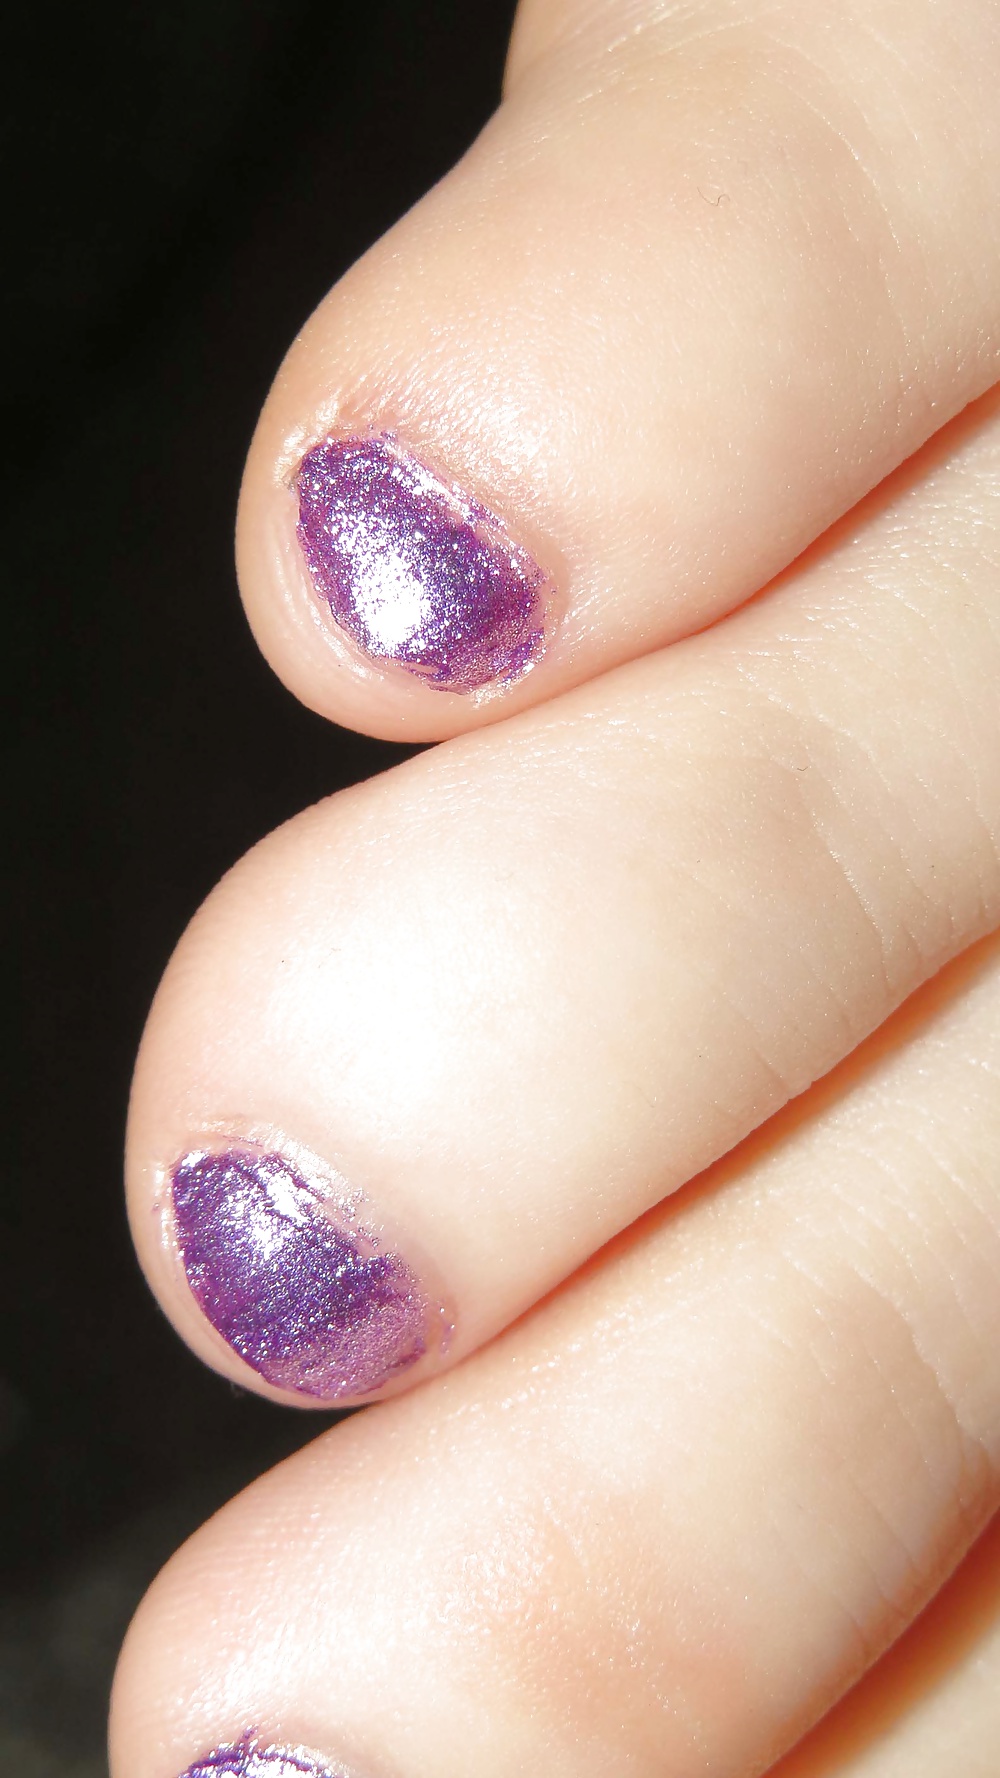 barefeet and purple nails pict gal